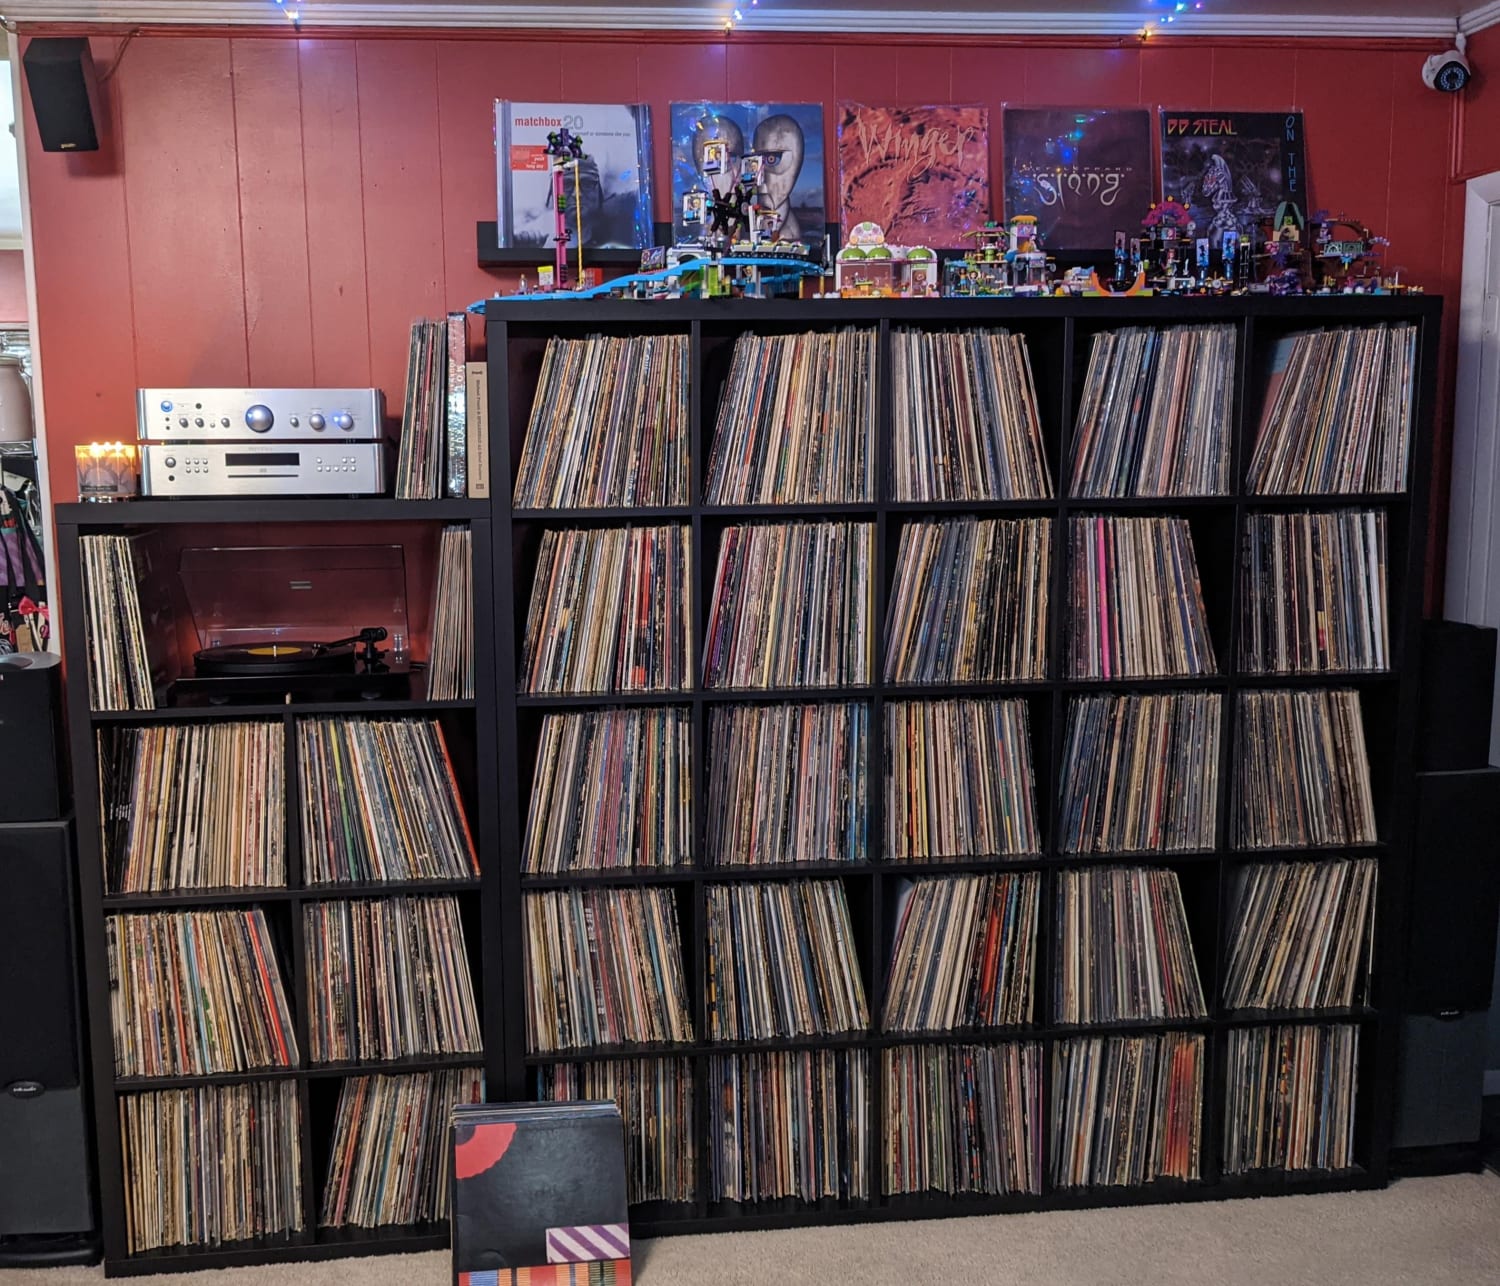 How Does Your Collection Shelve?